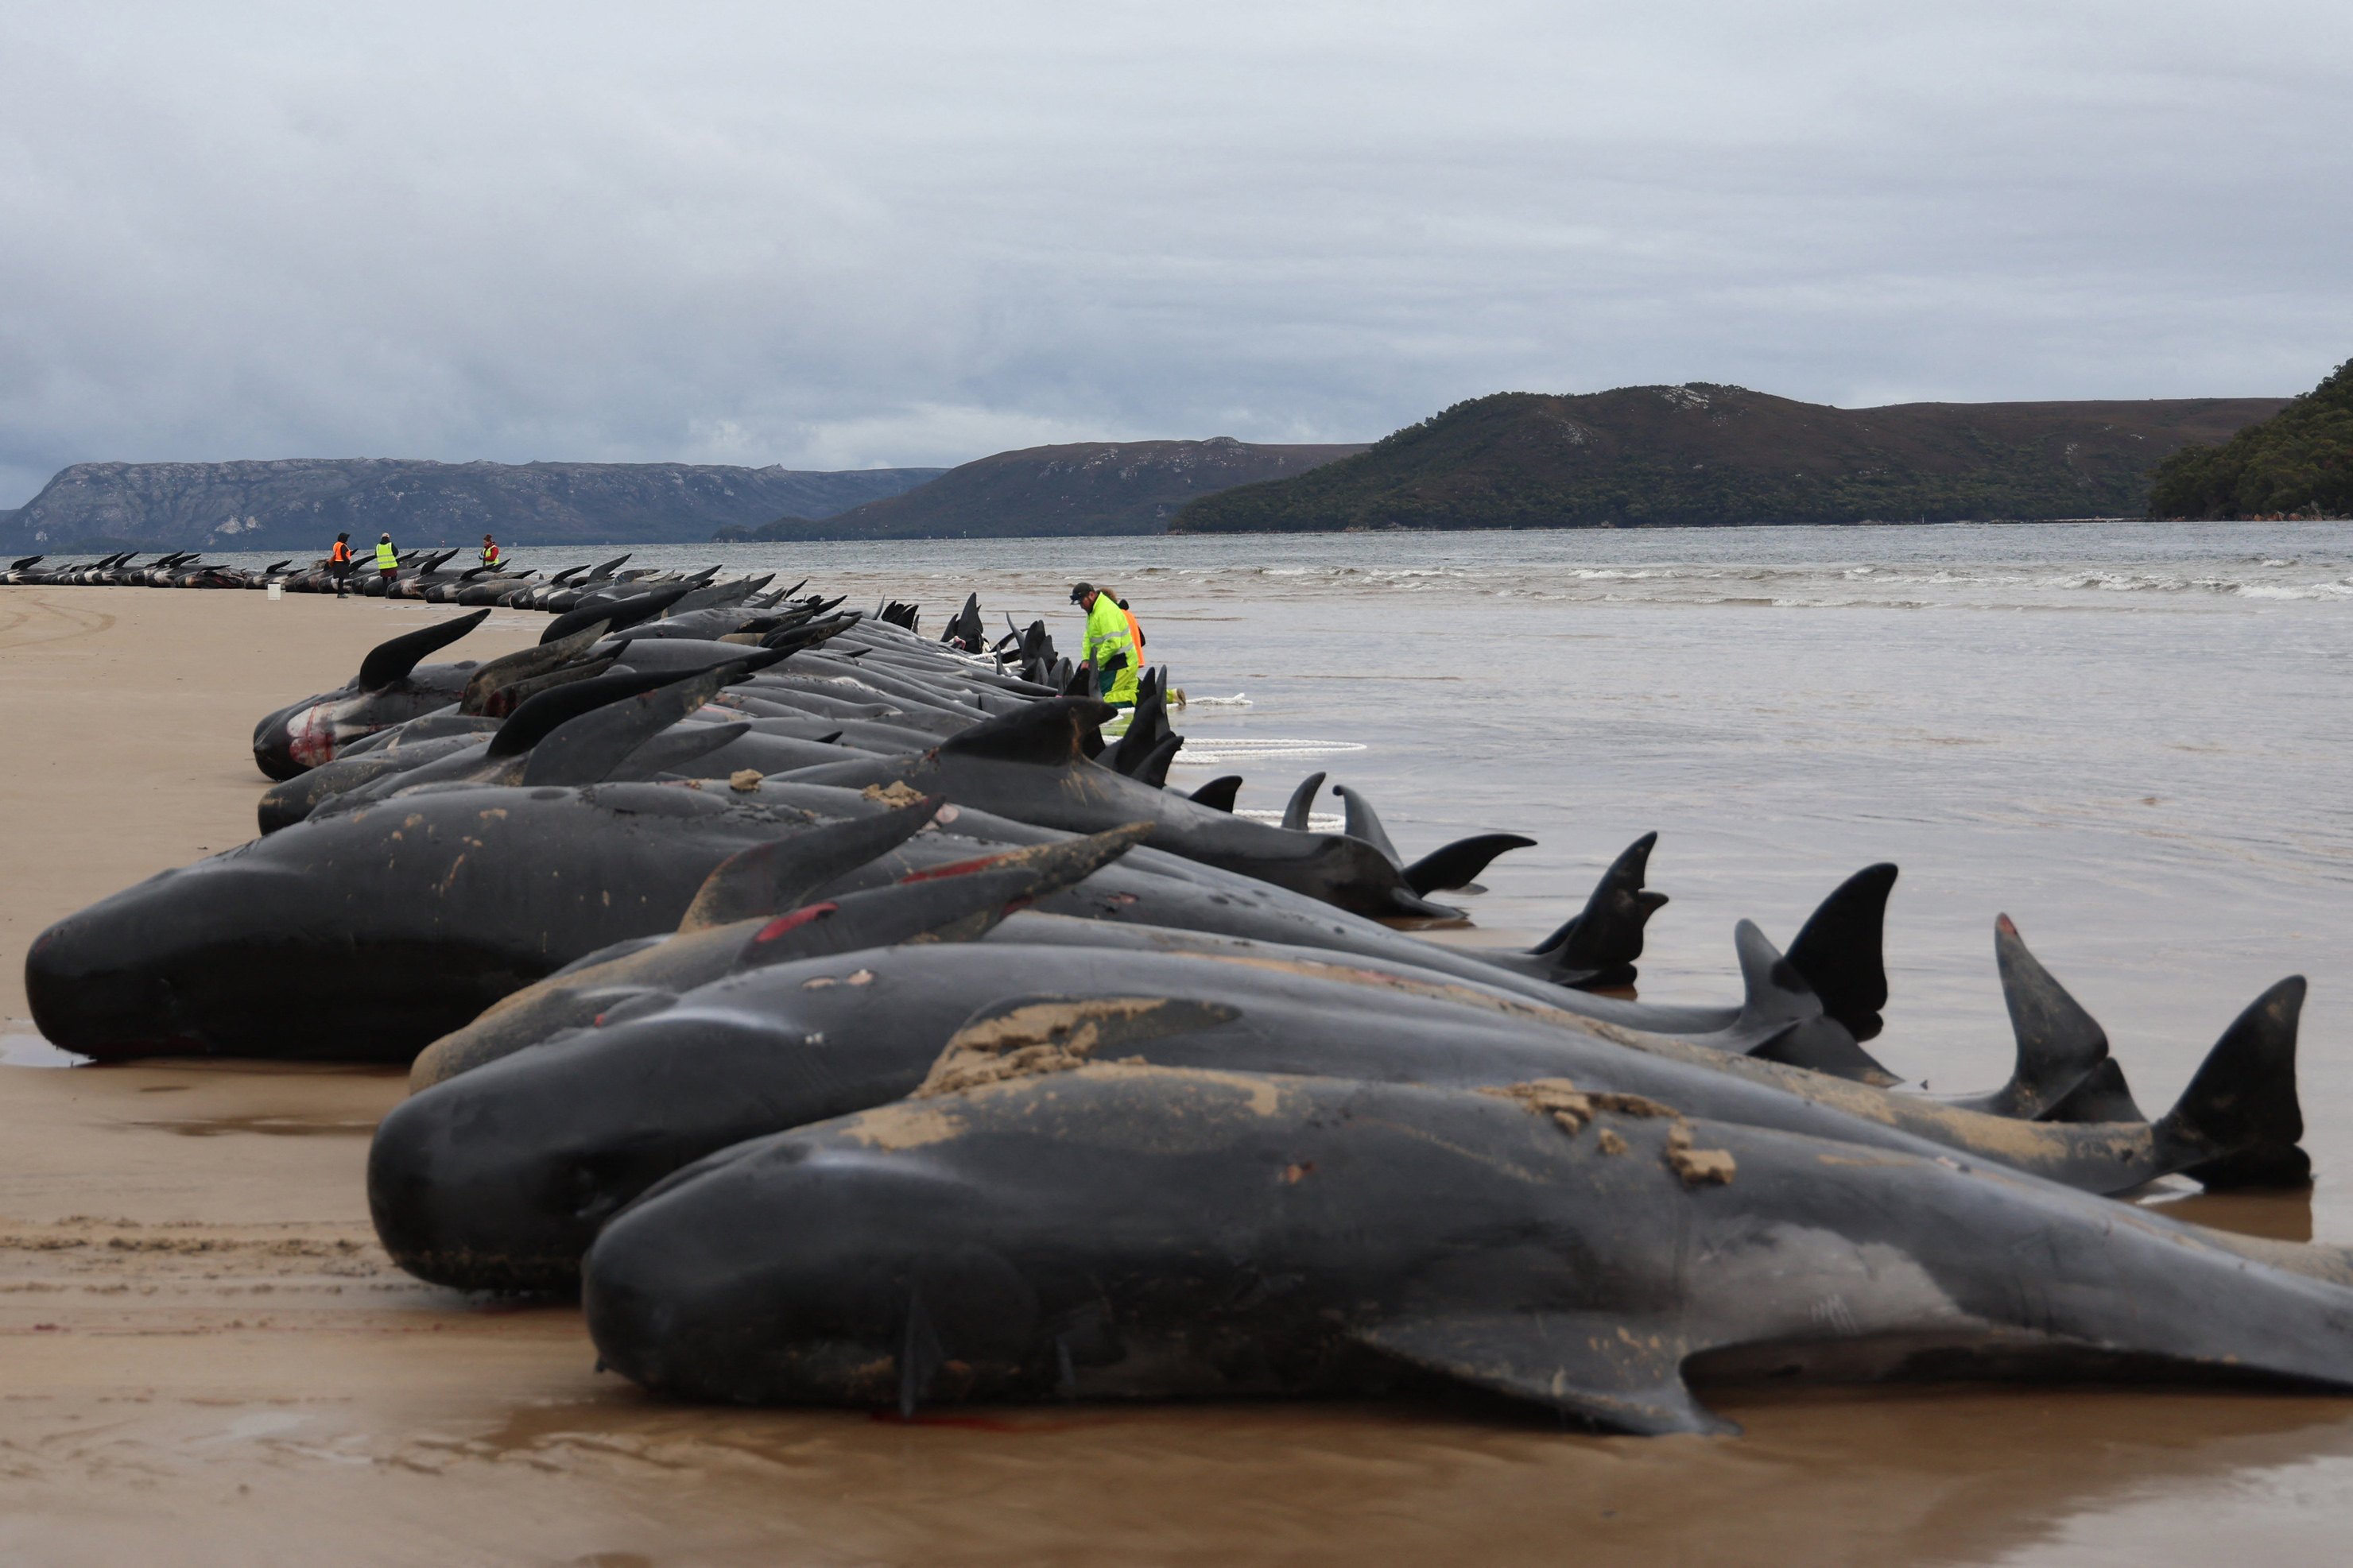 Heartbreaking reason behind death of 55 pilot whales on Traigh Mhor beach  revealed